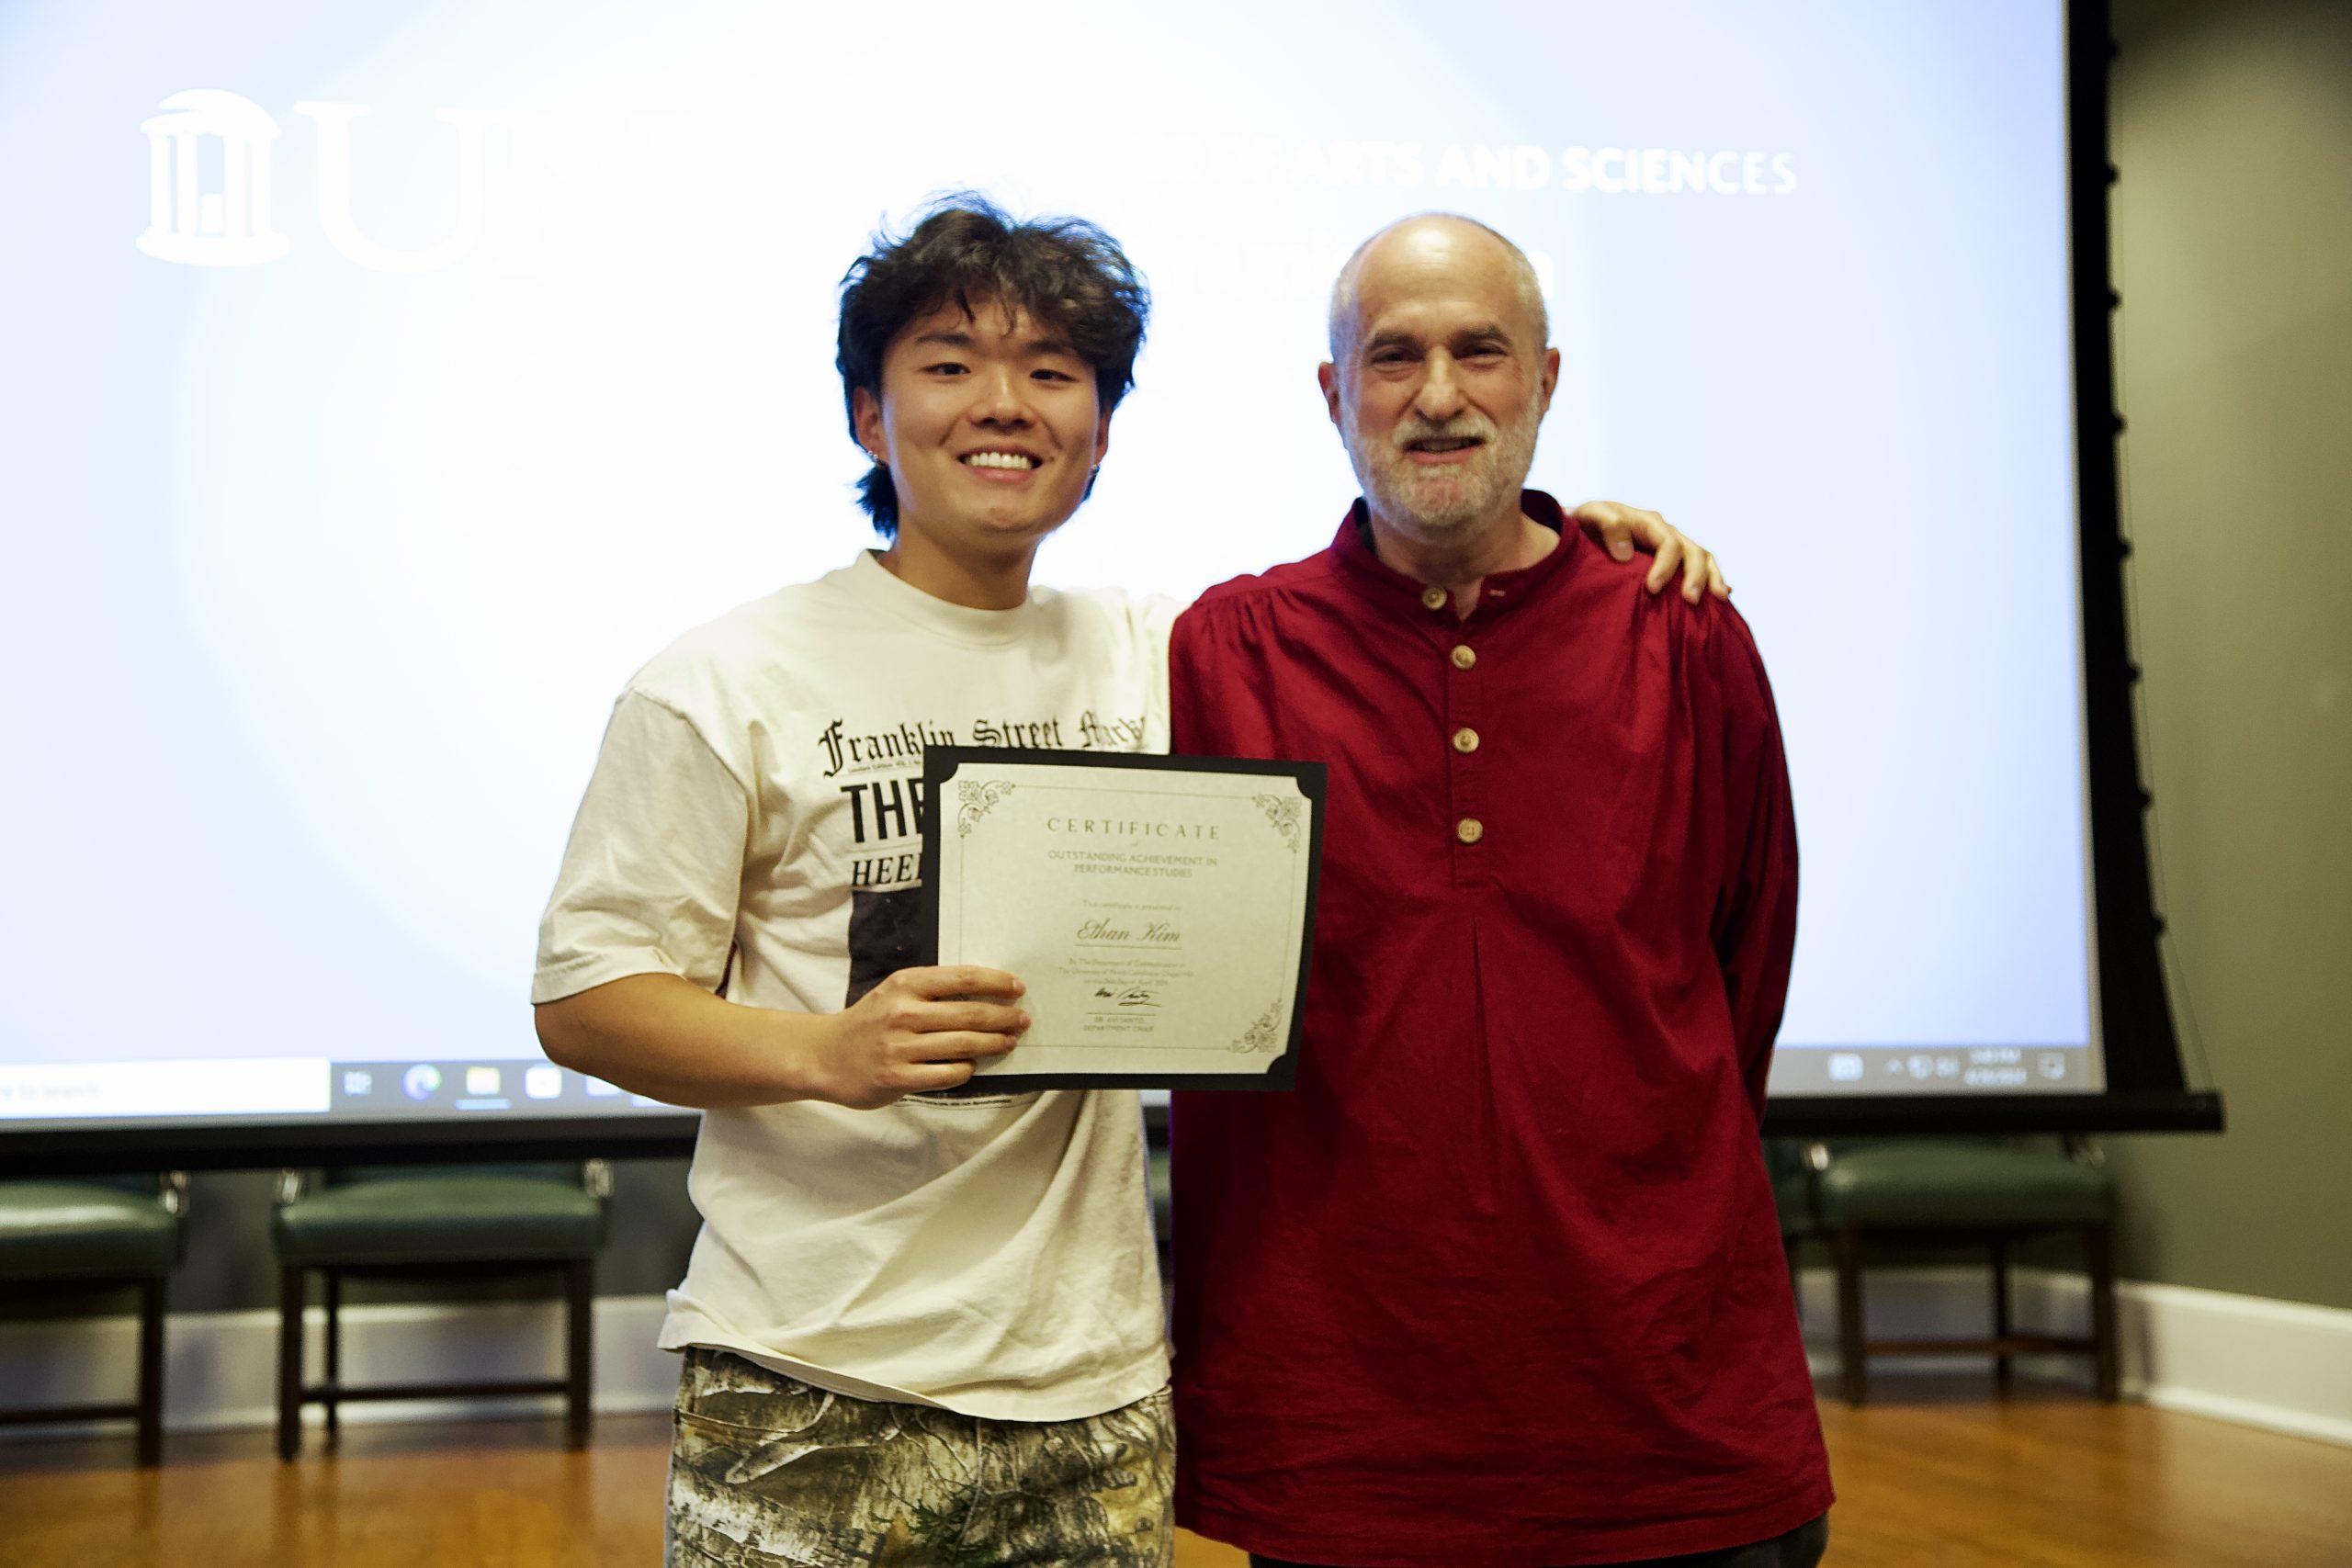 Outstanding Achievement in Performance Studies Presented to Ethan Kim by Joseph Megel